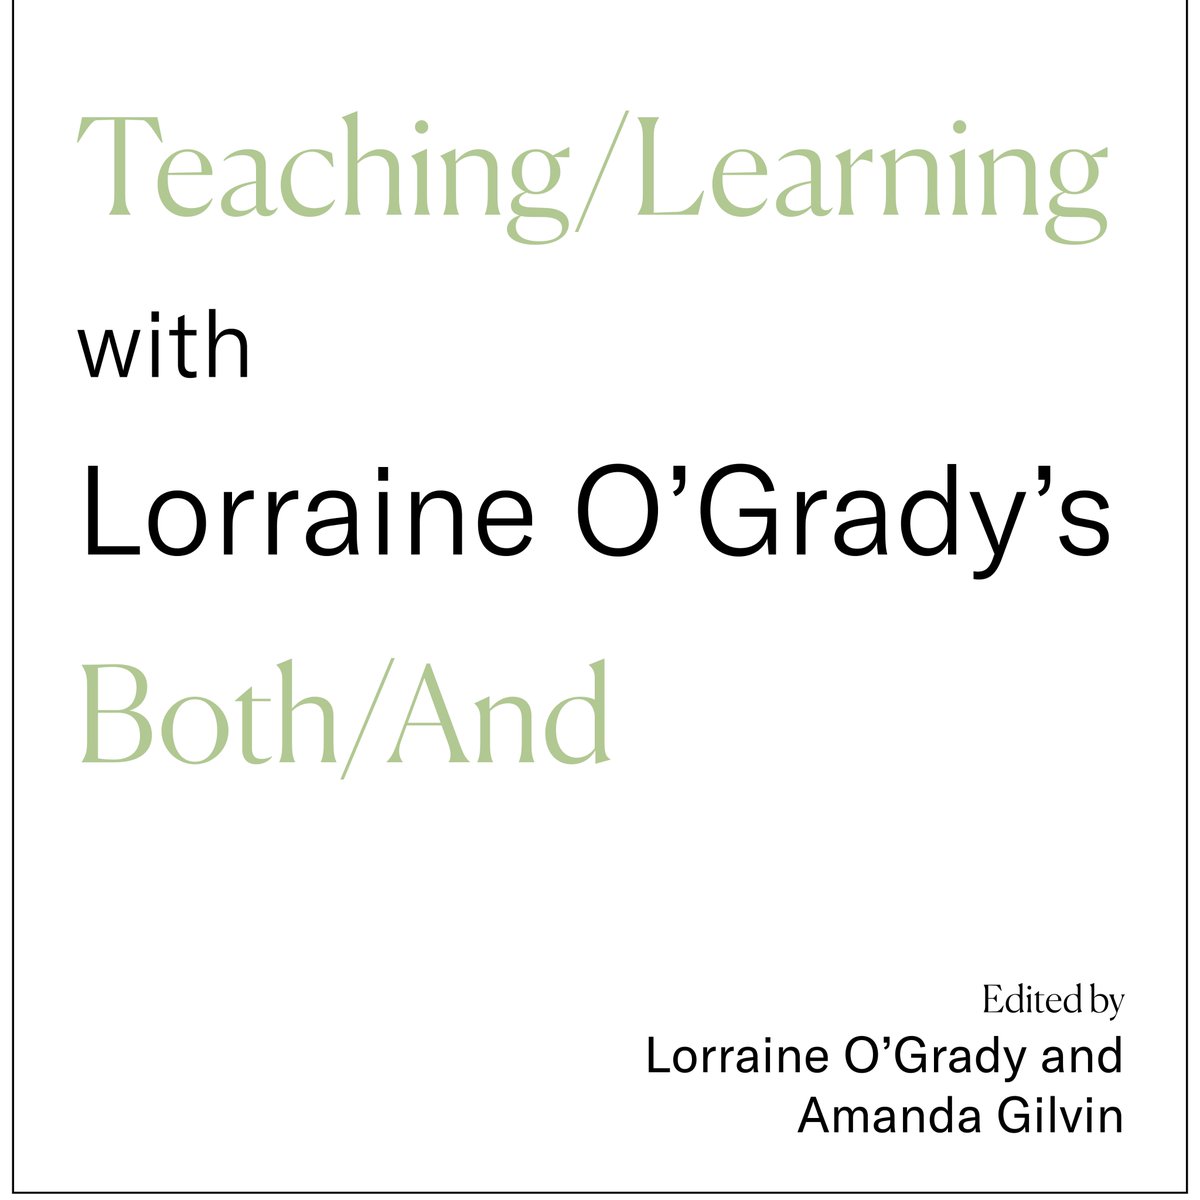 𝘛𝘦𝘢𝘤𝘩𝘪𝘯𝘨/𝘓𝘦𝘢𝘳𝘯𝘪𝘯𝘨 includes writings by Lorraine O'Grady, art critics, and members of the @Wellesley community that reflect on how they teach and learn with 𝘉𝘰𝘵𝘩/𝘈𝘯𝘥.⁣ #lorraineogrady simplebooklet.com/teachinglearni…